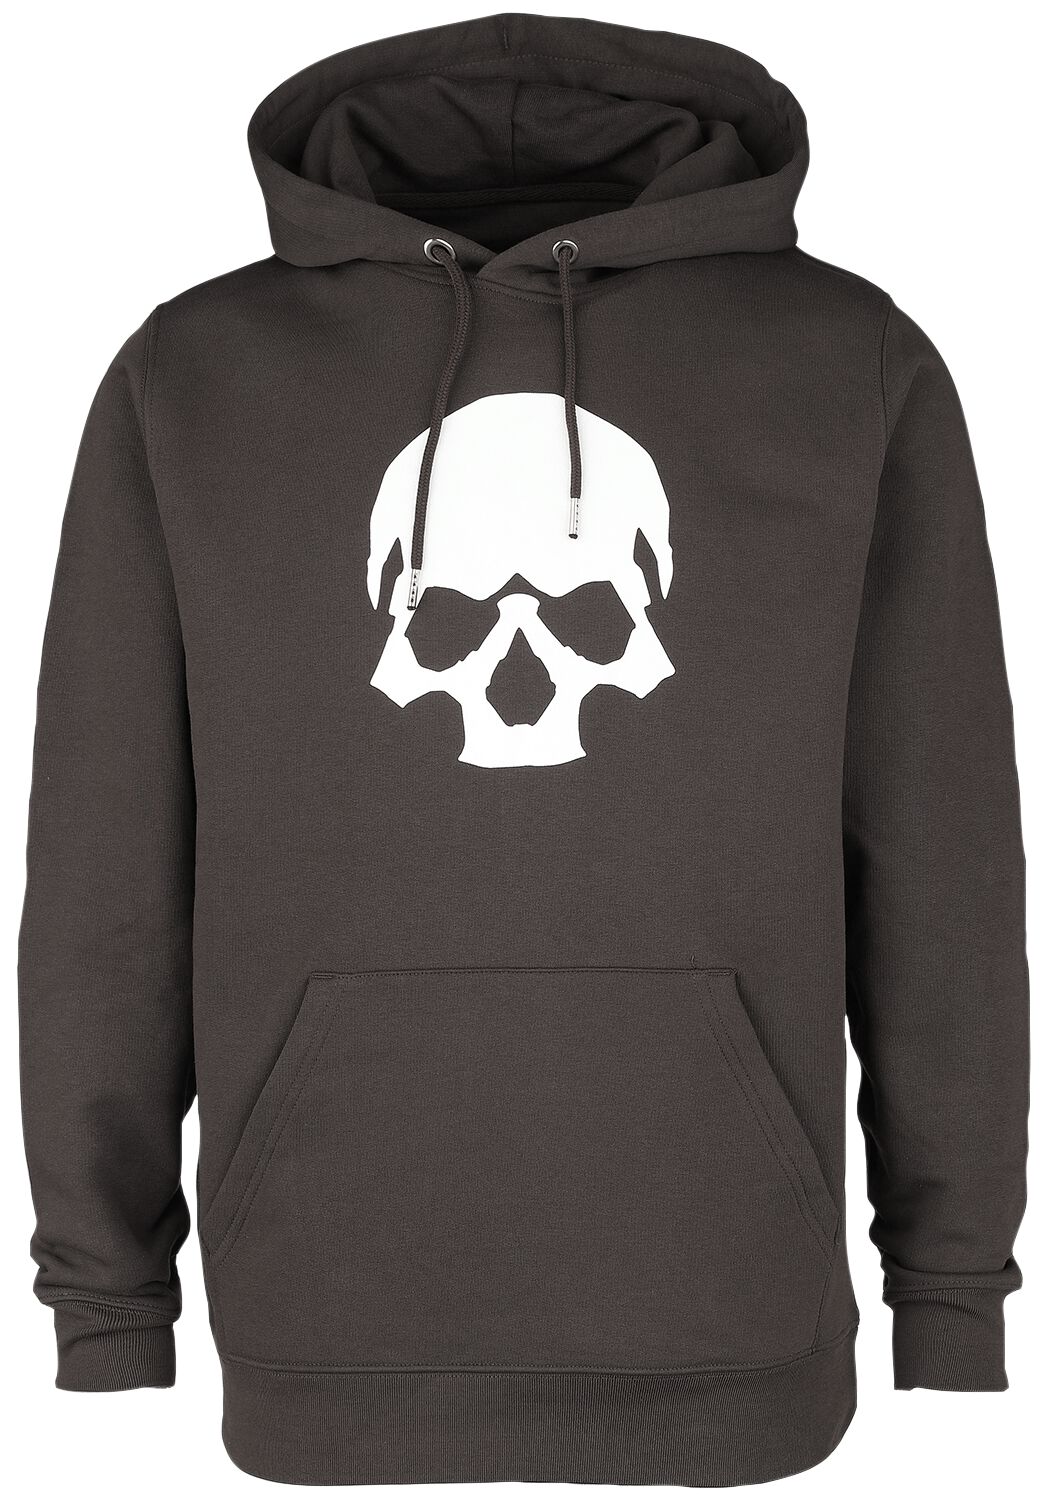 Elex 2 Outlaws Hooded sweater dark brown